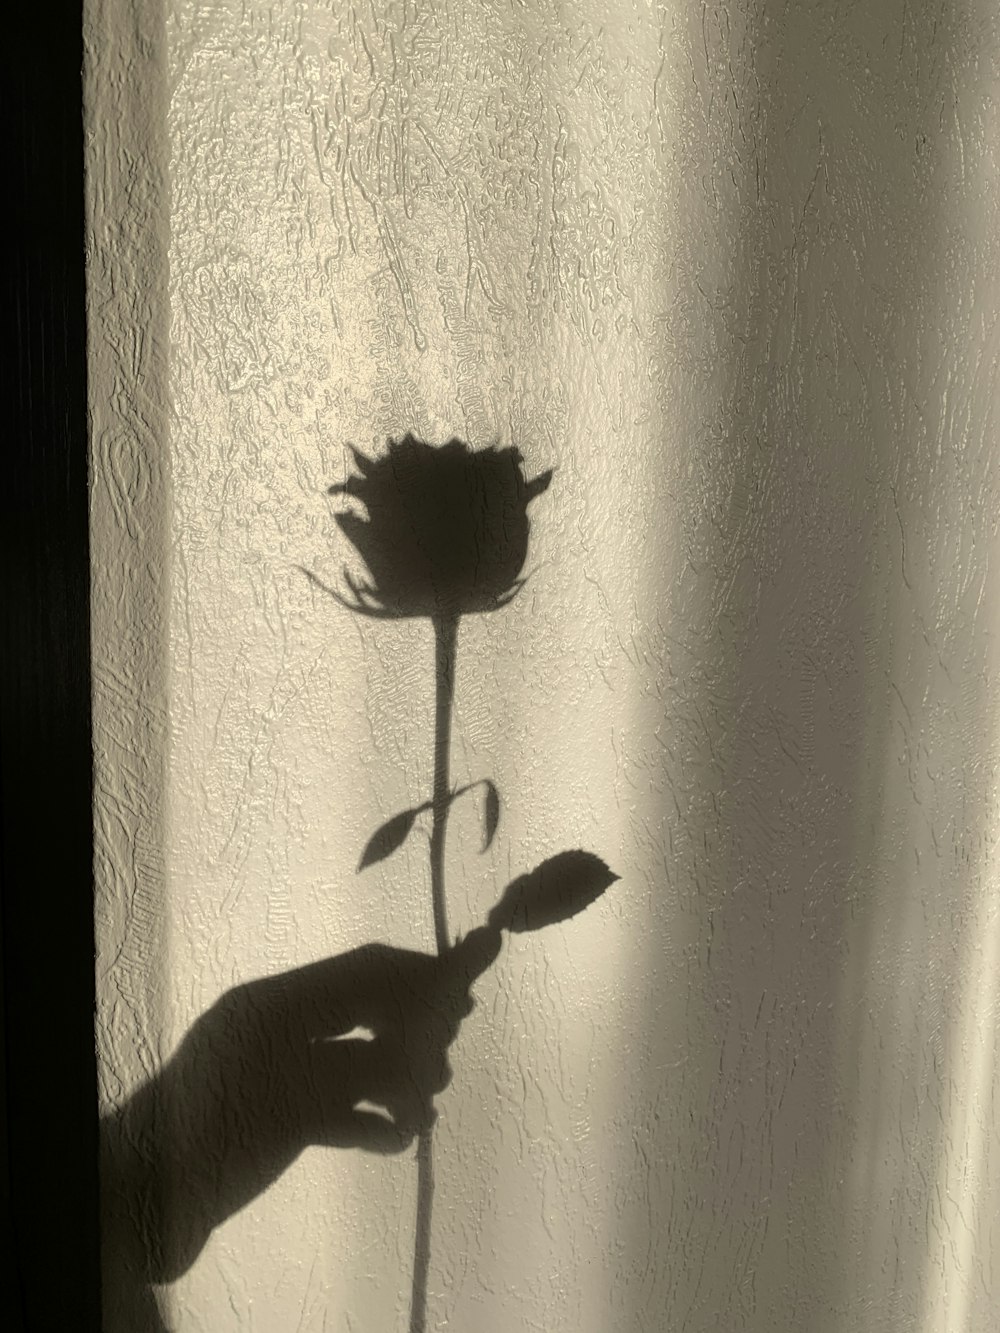 a shadow of a person holding a flower